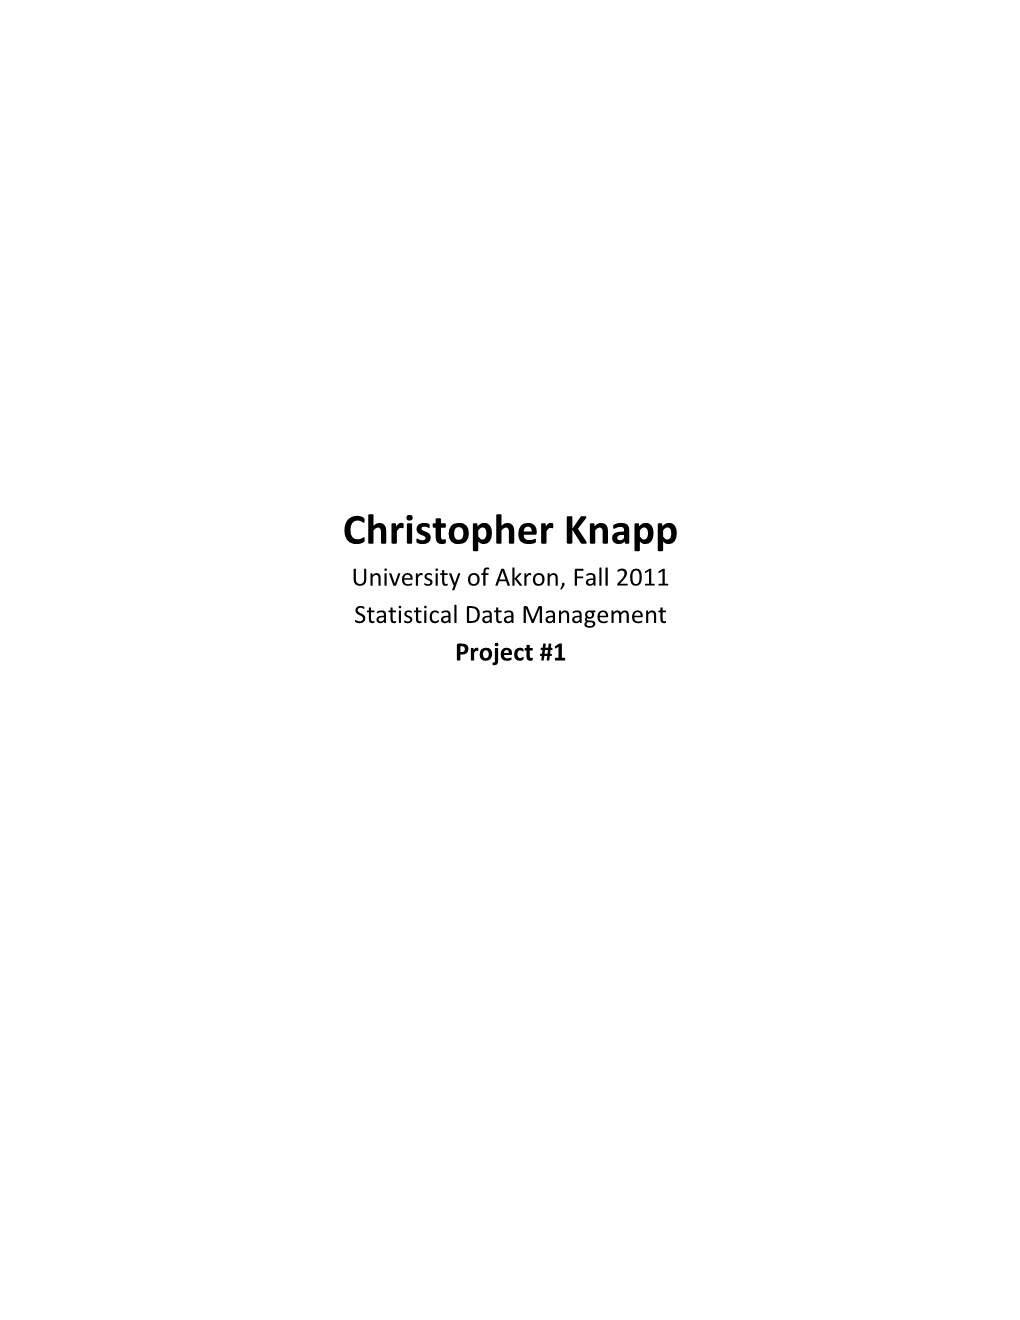 Christopher Knapp University of Akron, Fall 2011 Statistical Data Management Project #1